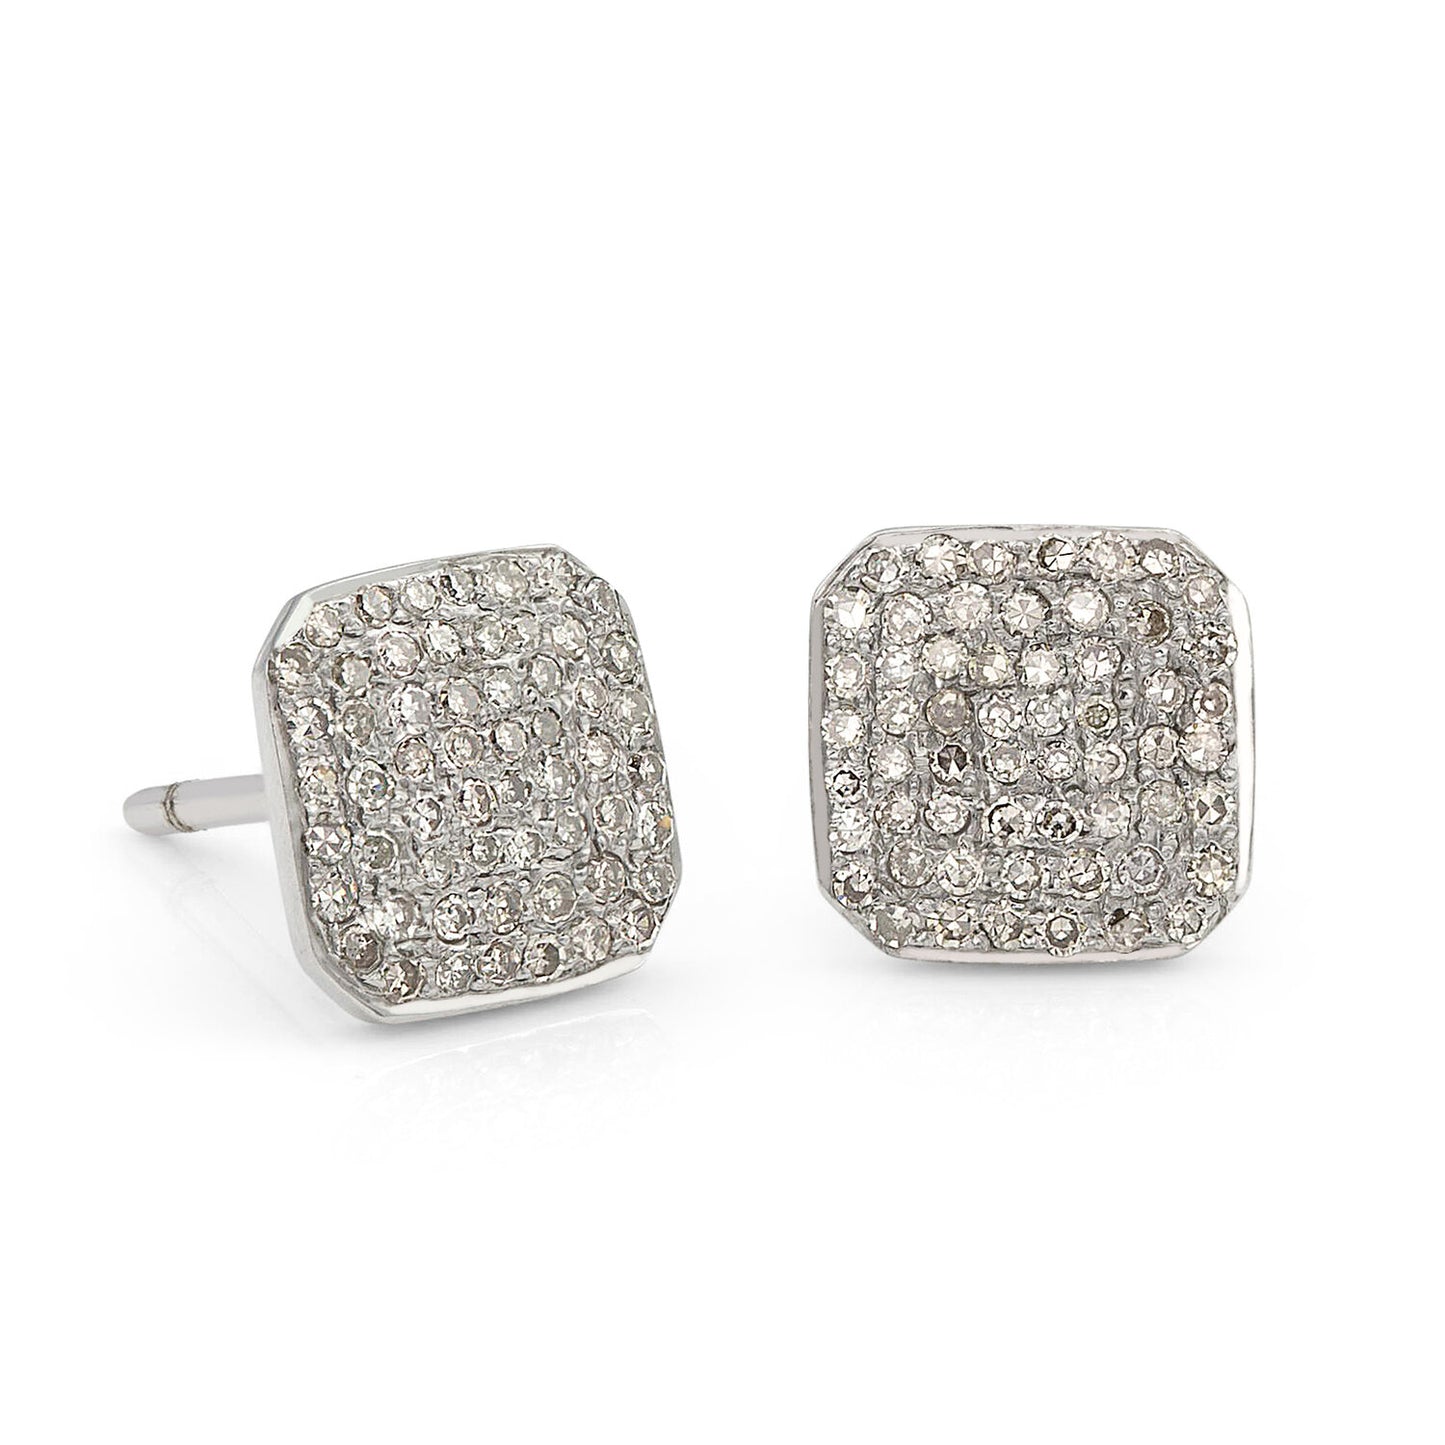 The Stella earring features a classic chamfered square shaped stud set with diamond pavé. Perfect for everyday wear or a special occasion.  Available in sterling silver, 14K yellow gold, 14K rose gold, or 14K white gold  Stud dimensions: 8 mm x 8 mm  Polished finish  Made in USA